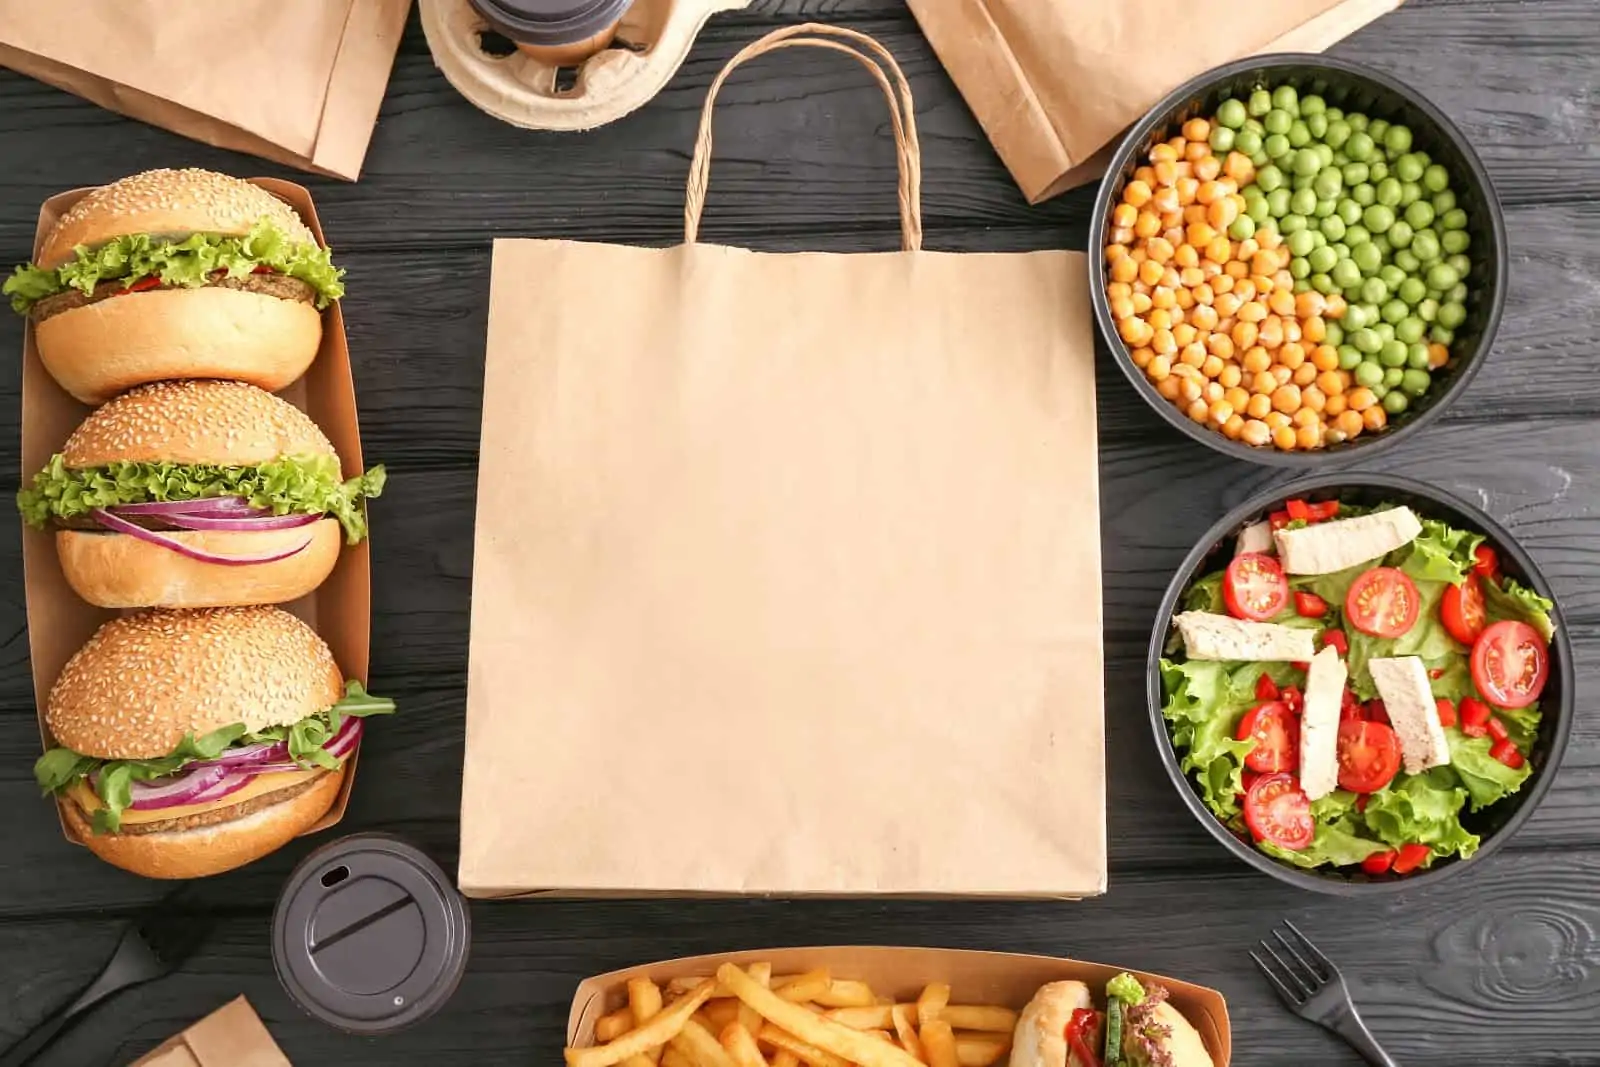 Postmates tipping: Brown paper bag surrounded by takeout food